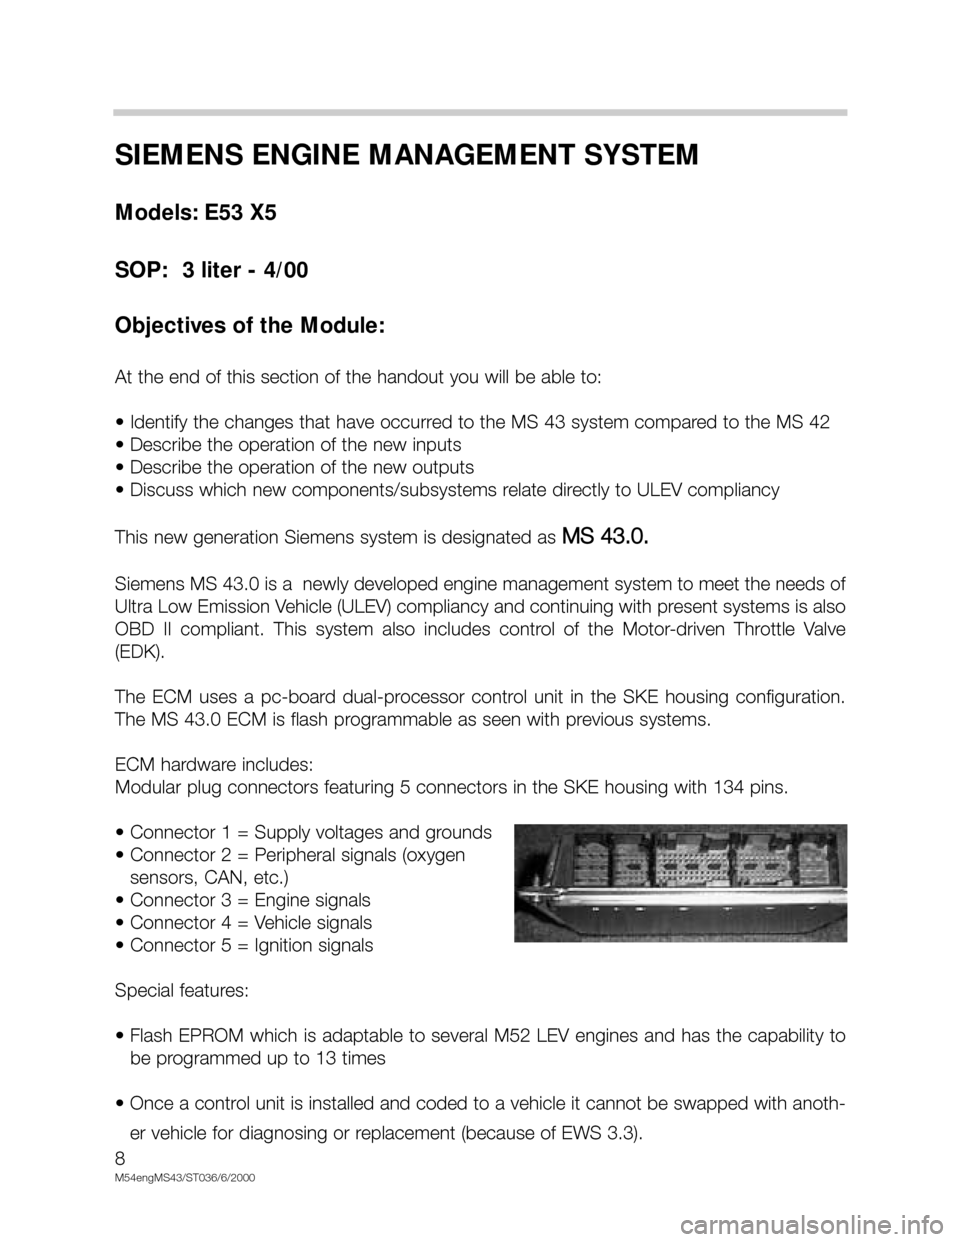 BMW X5 2006 E53 M54 Engine Workshop Manual 8
M54engMS43/ST036/6/2000
SIEMENS ENGINE MANAGEMENT SYSTEM
Models: E53 X5
SOP:  3 liter - 4/00
Objectives of the Module:
At the end of this section of the handout you will be able to:
• Identify the